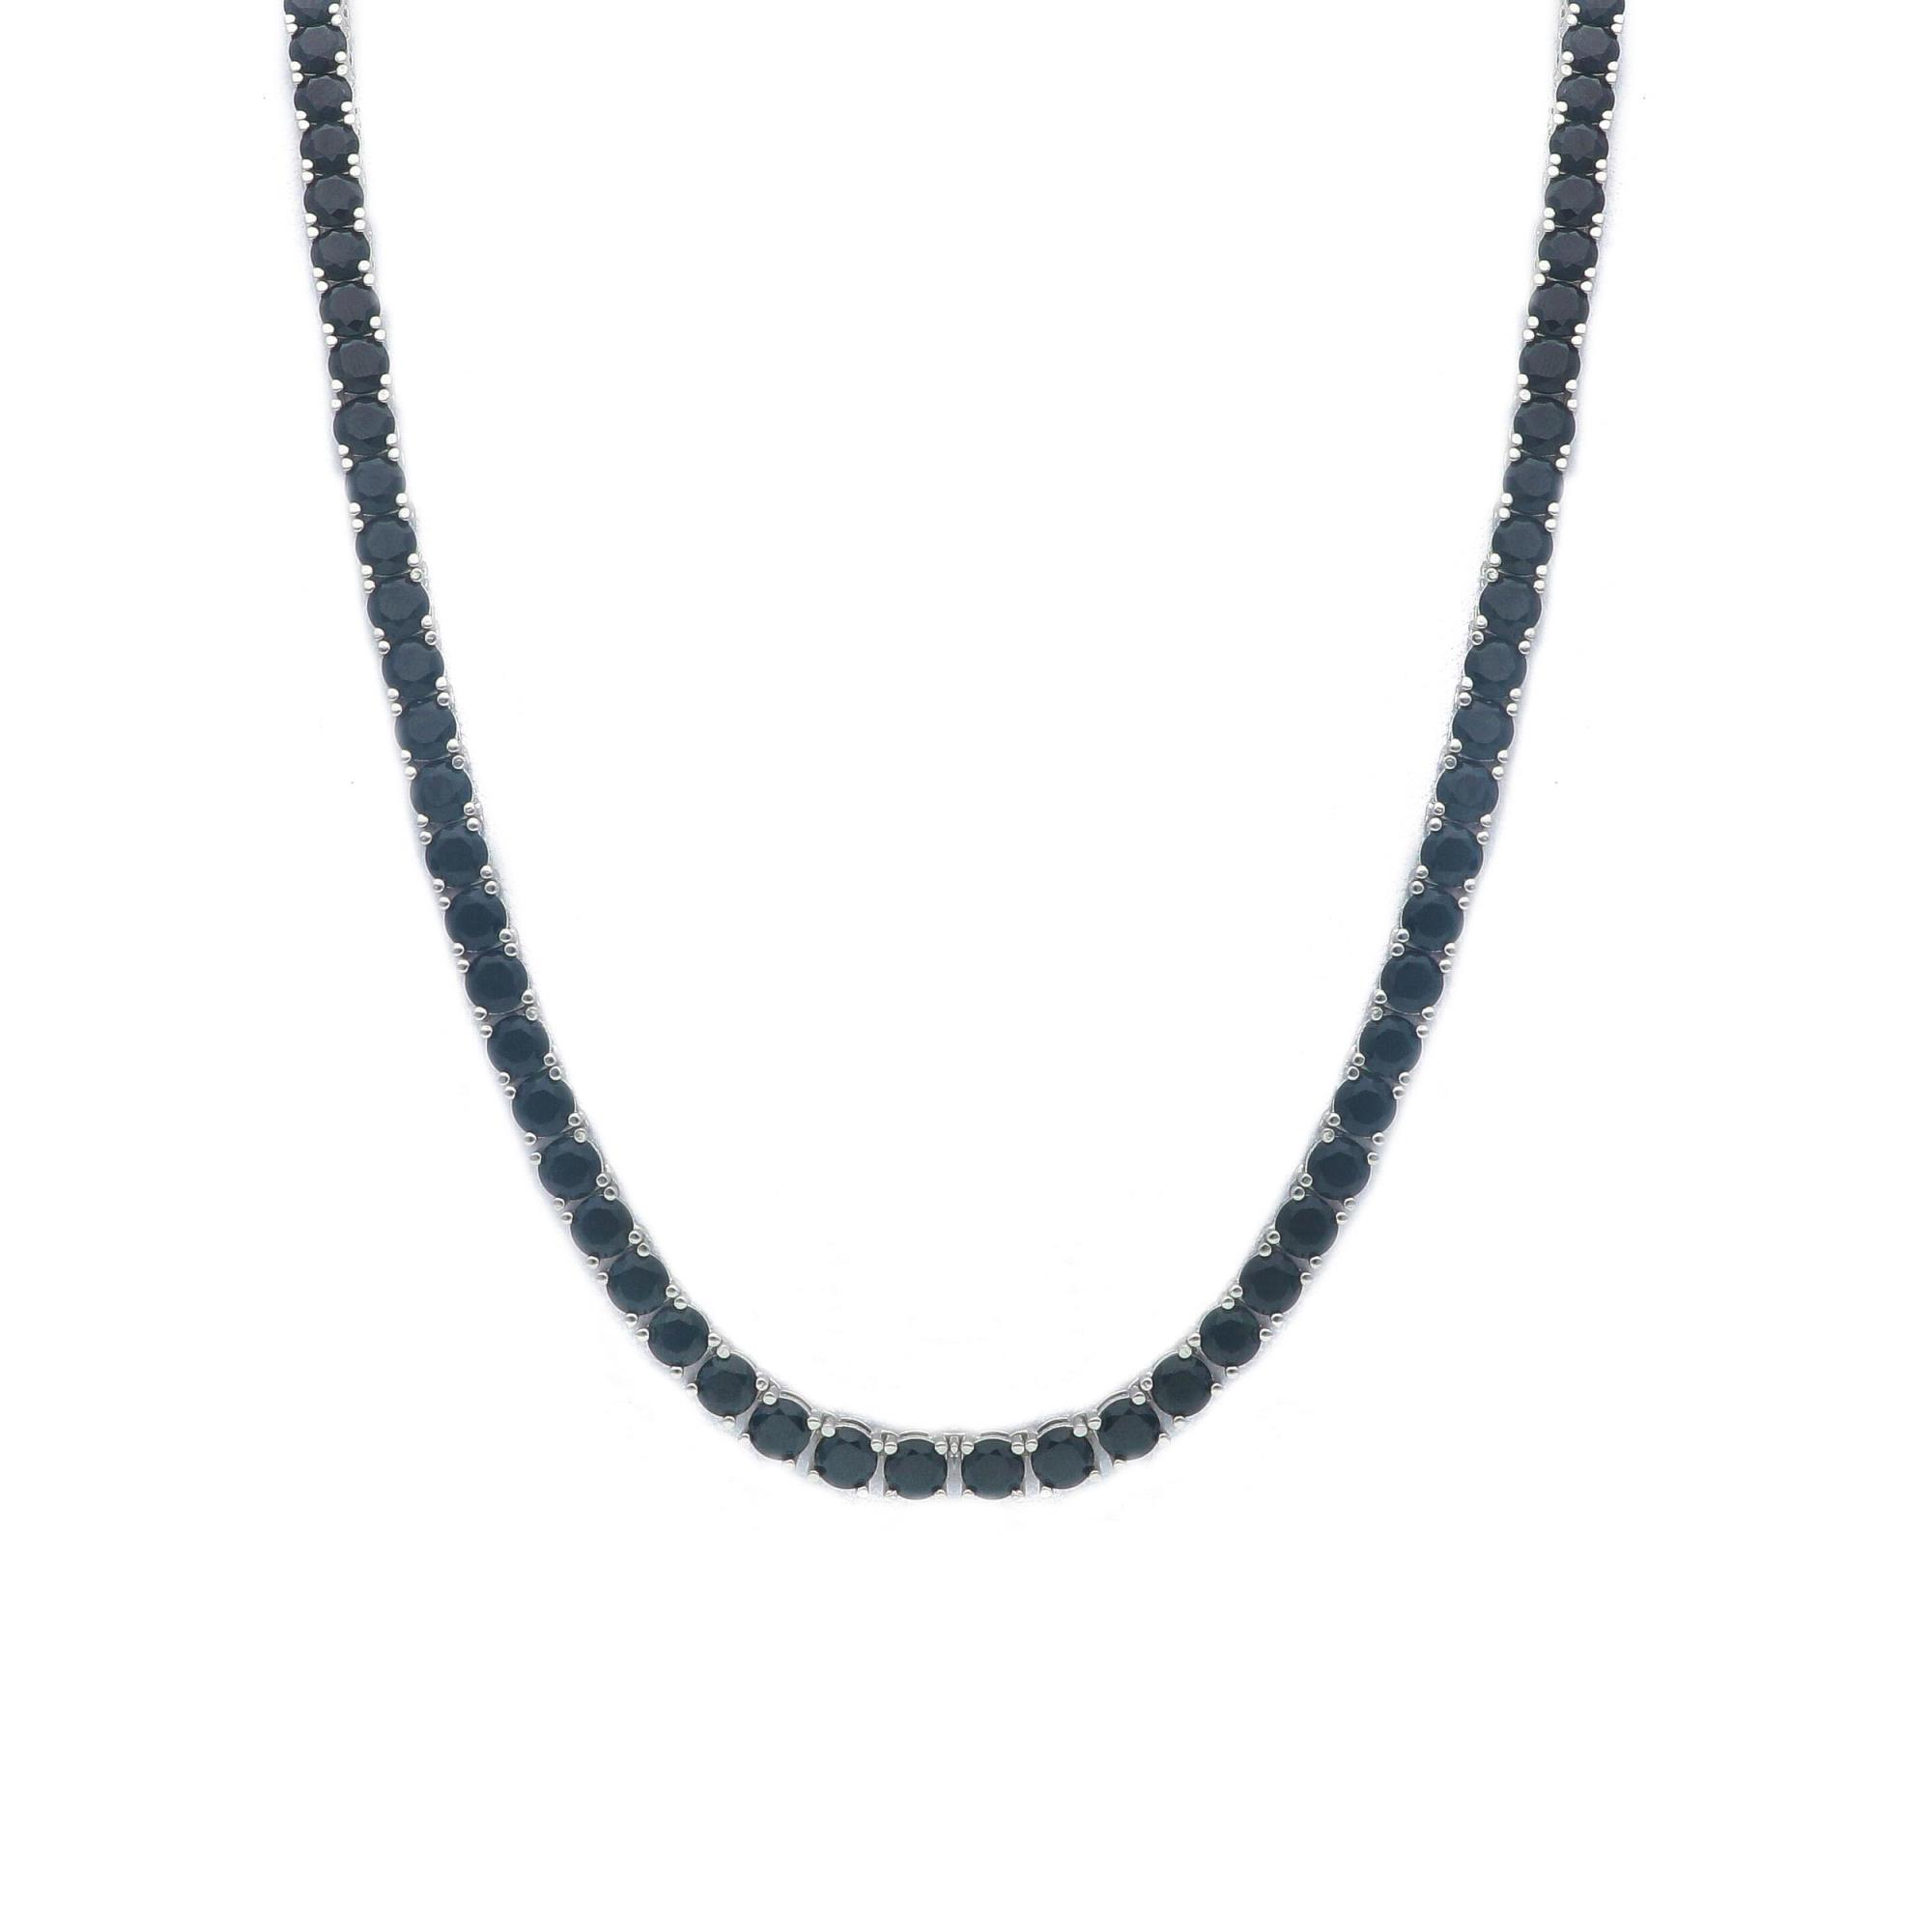 Silver tennis necklace with black zircons - ORO&CO 925